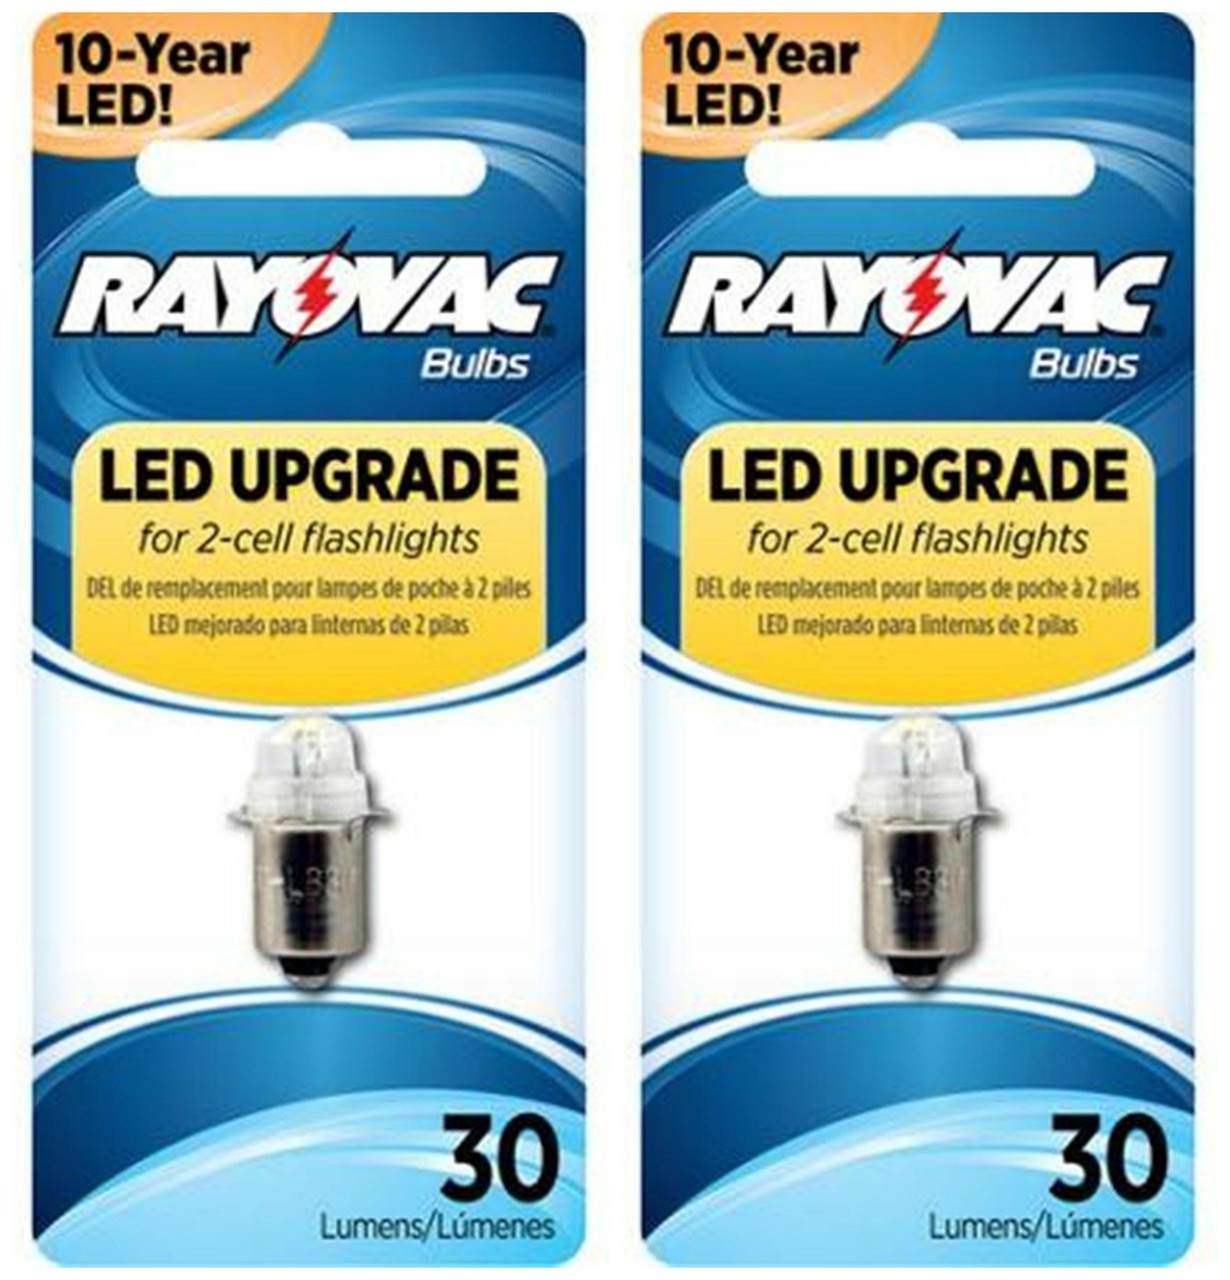 Rayovac LED Upgrade Bulb For 2-Cell Flashlights 3VLED-1T -2 Pack + FREE SHIPPING!